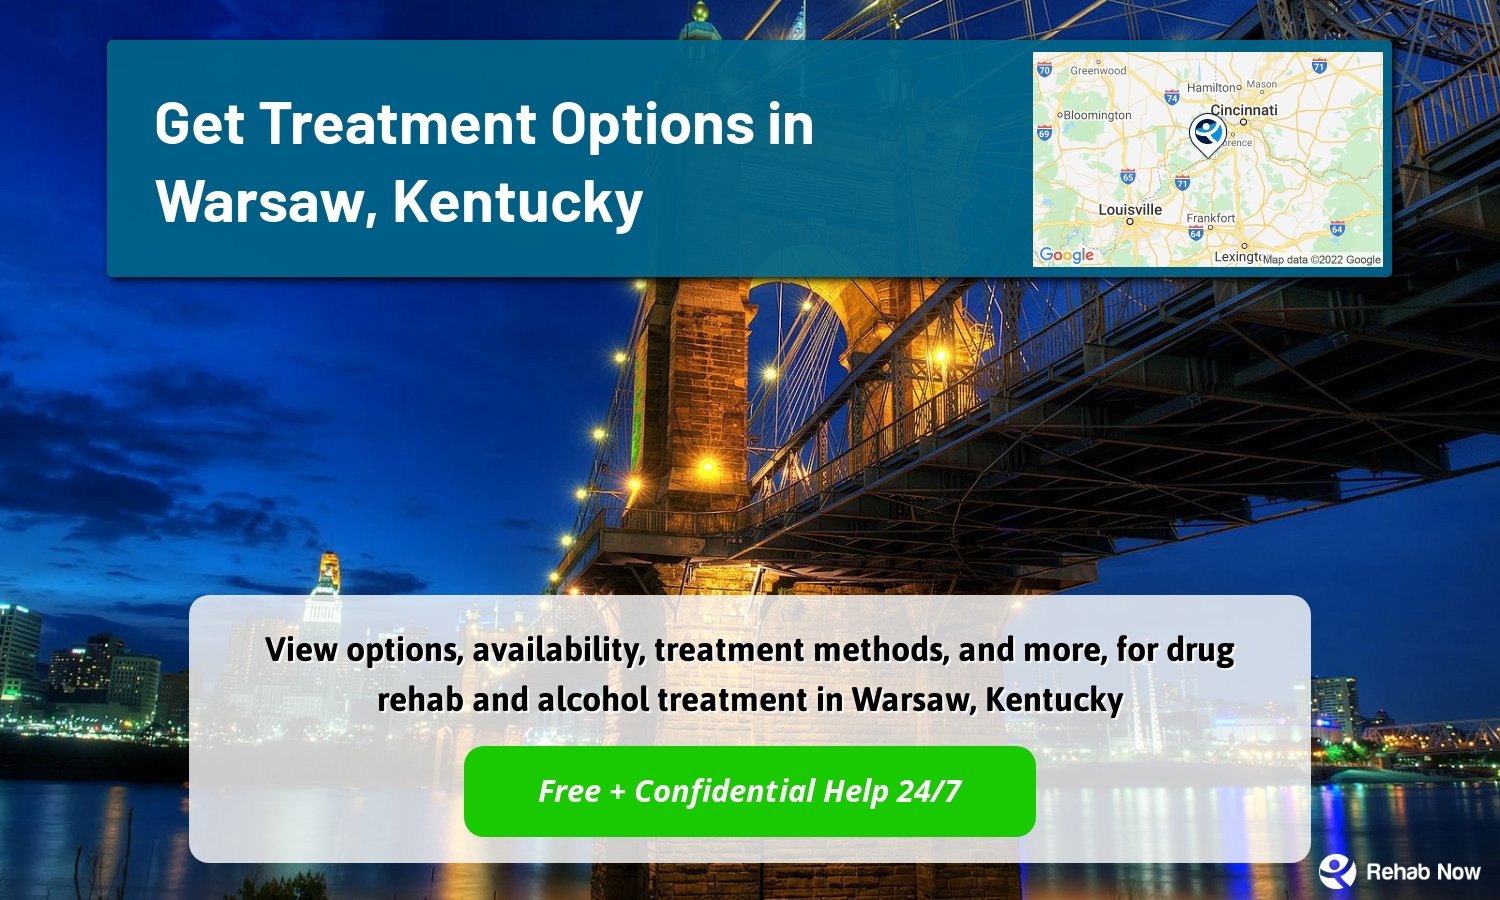 View options, availability, treatment methods, and more, for drug rehab and alcohol treatment in Warsaw, Kentucky